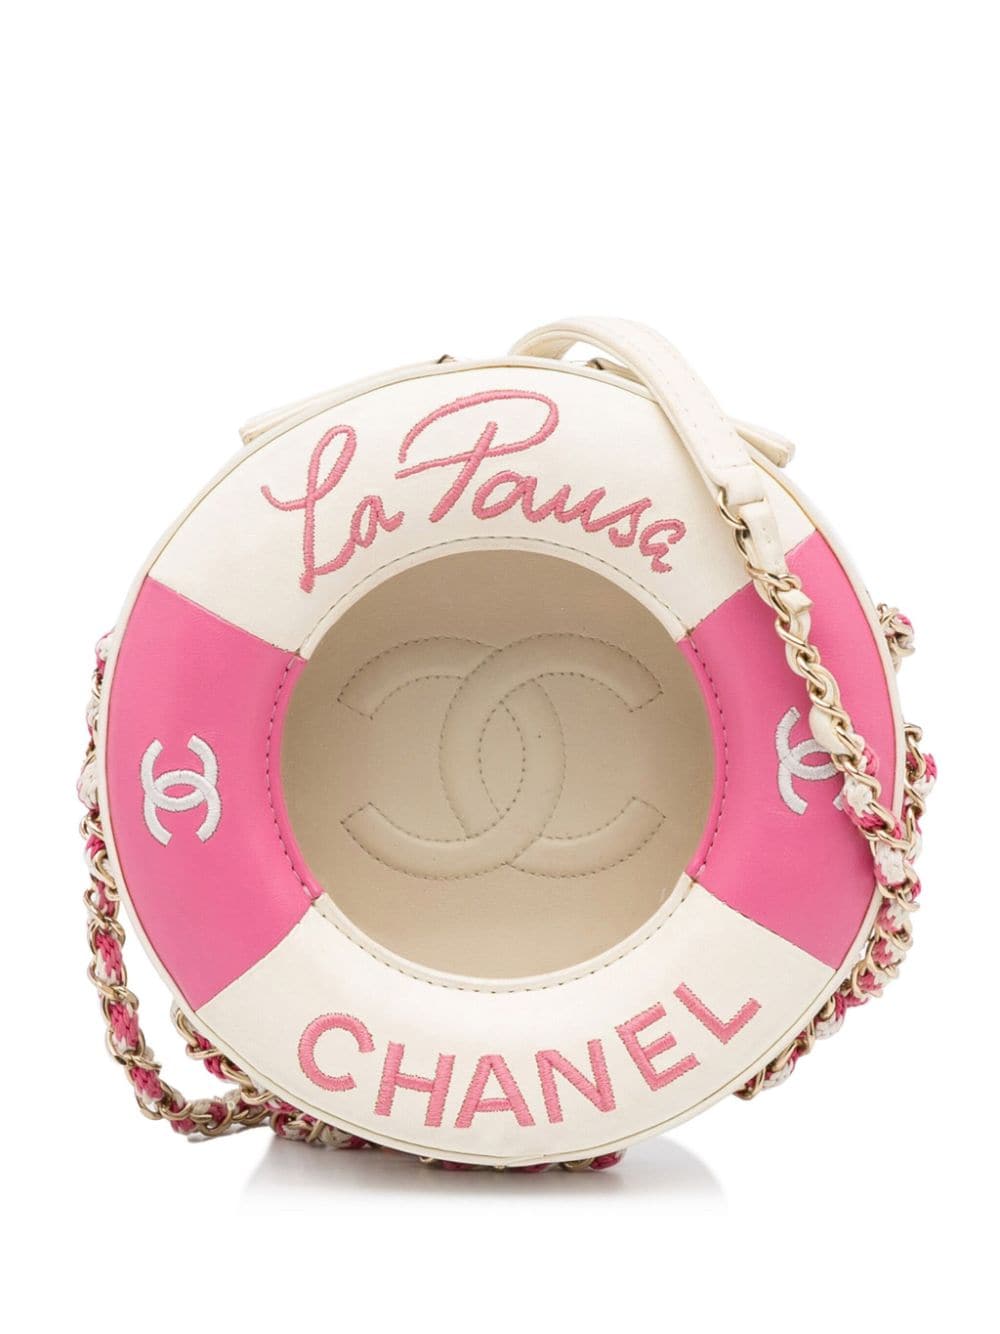 Chanel Pre-owned 1995 CC Diamond-Quilted Round Bag - Pink